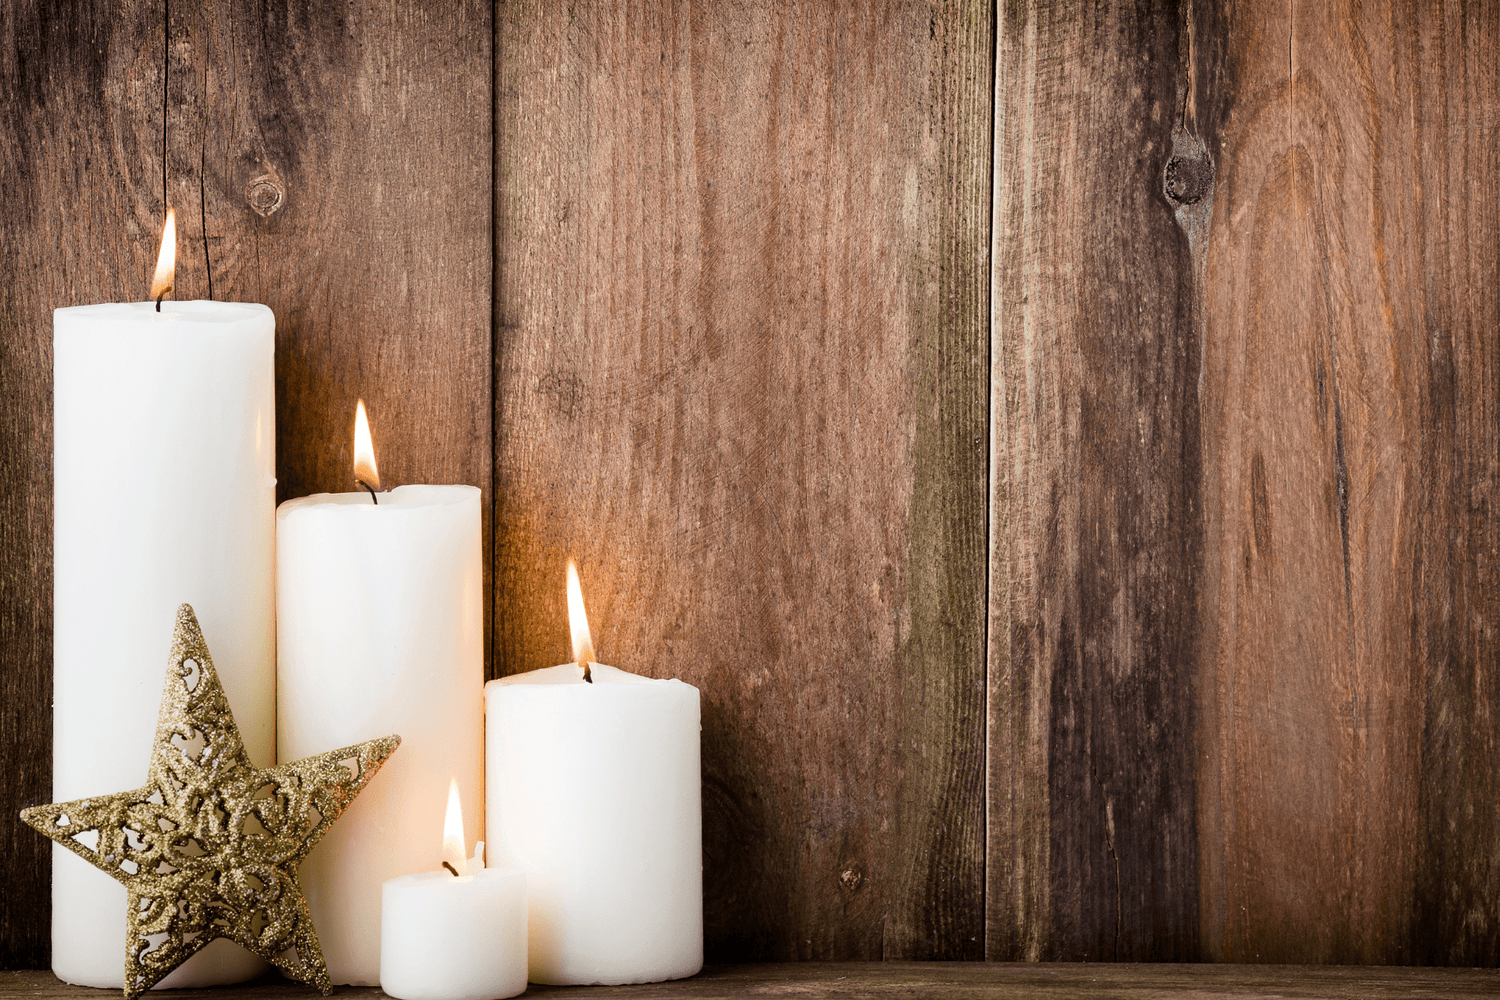 4 Candles burning in front of a wooden wall